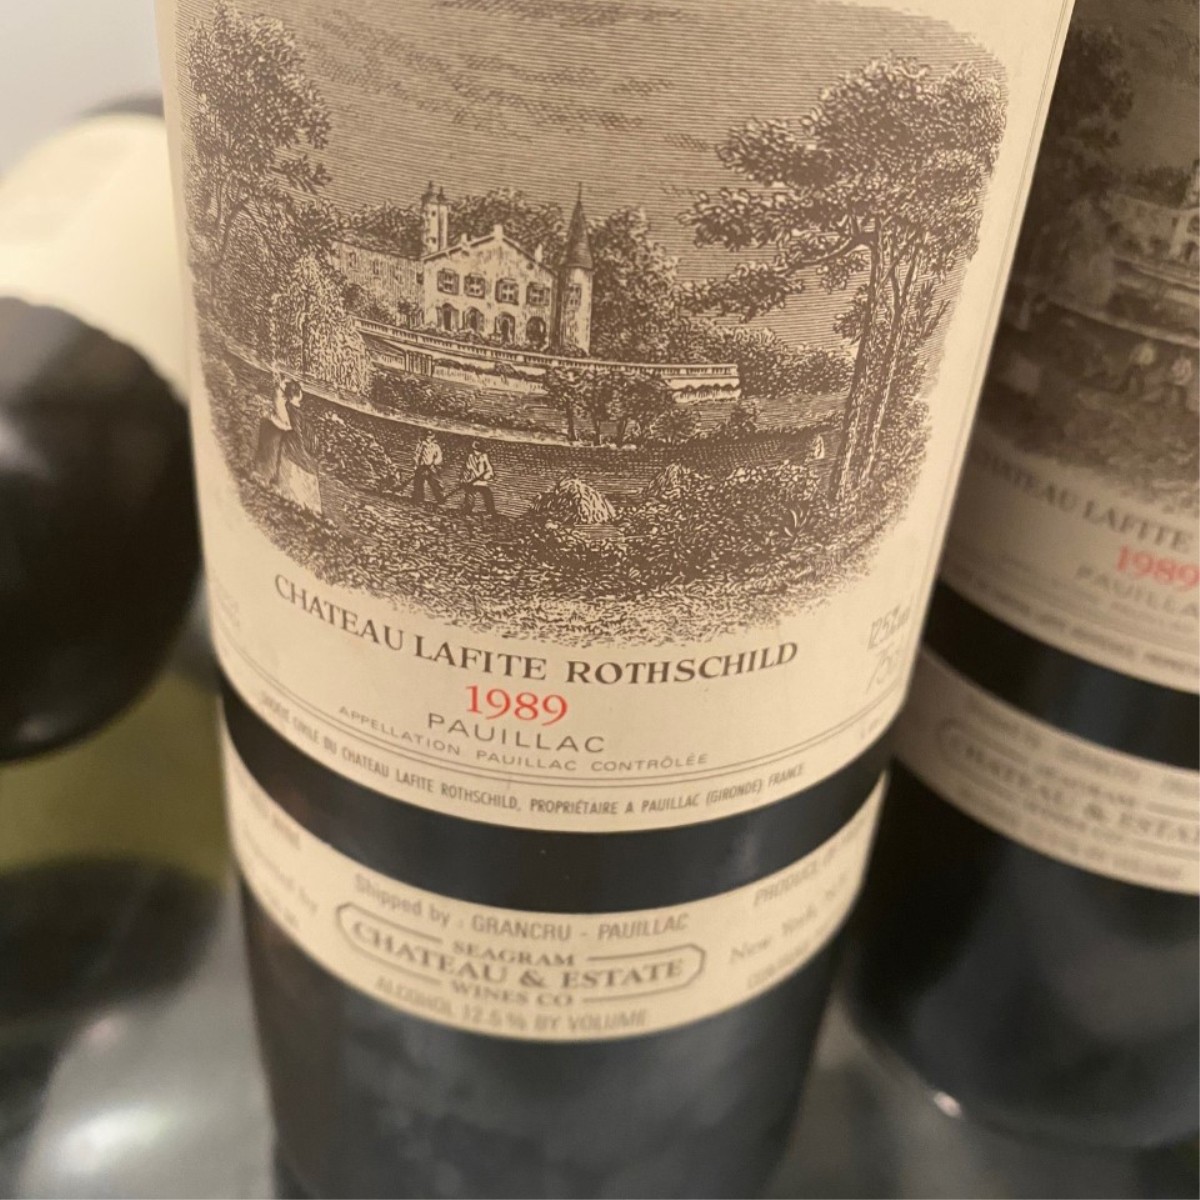 (2) Bottles of 1989 Chateau Lafite Rothschild